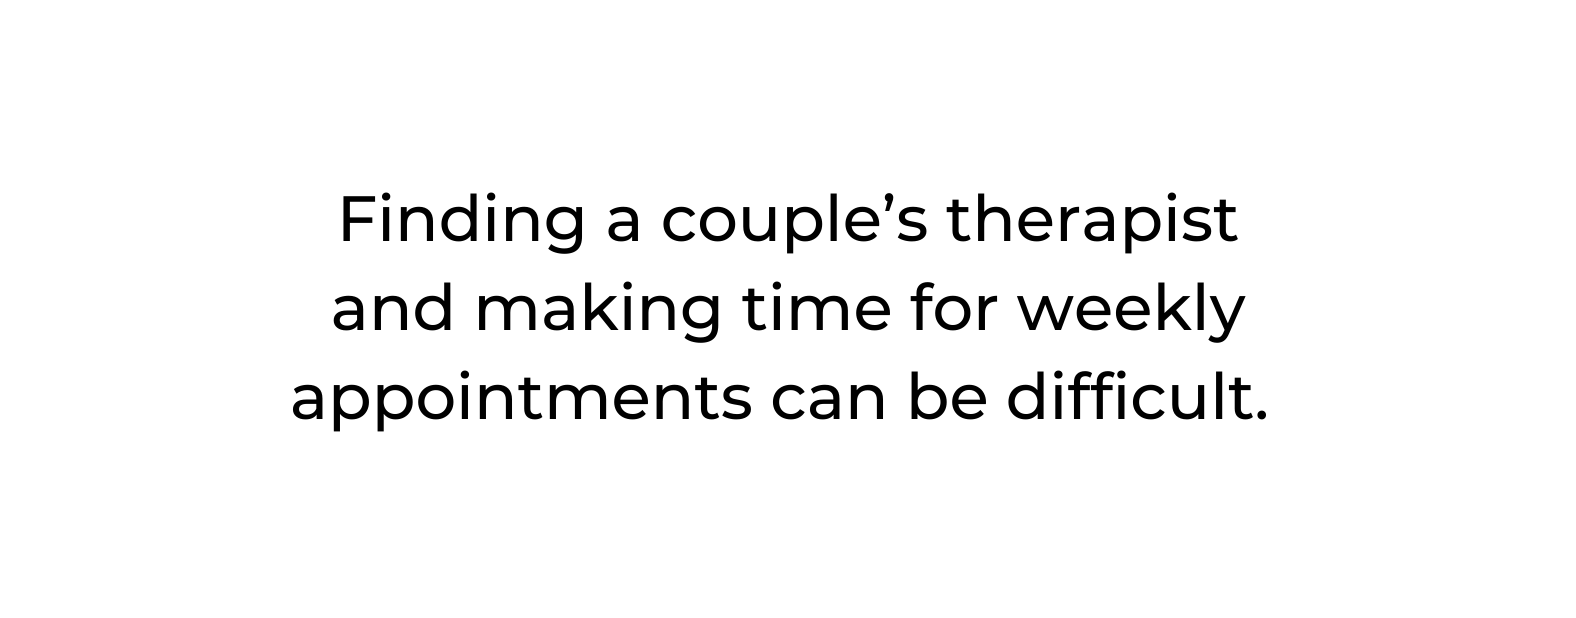 Finding a couple s therapist and making time for weekly appointments can be difficult